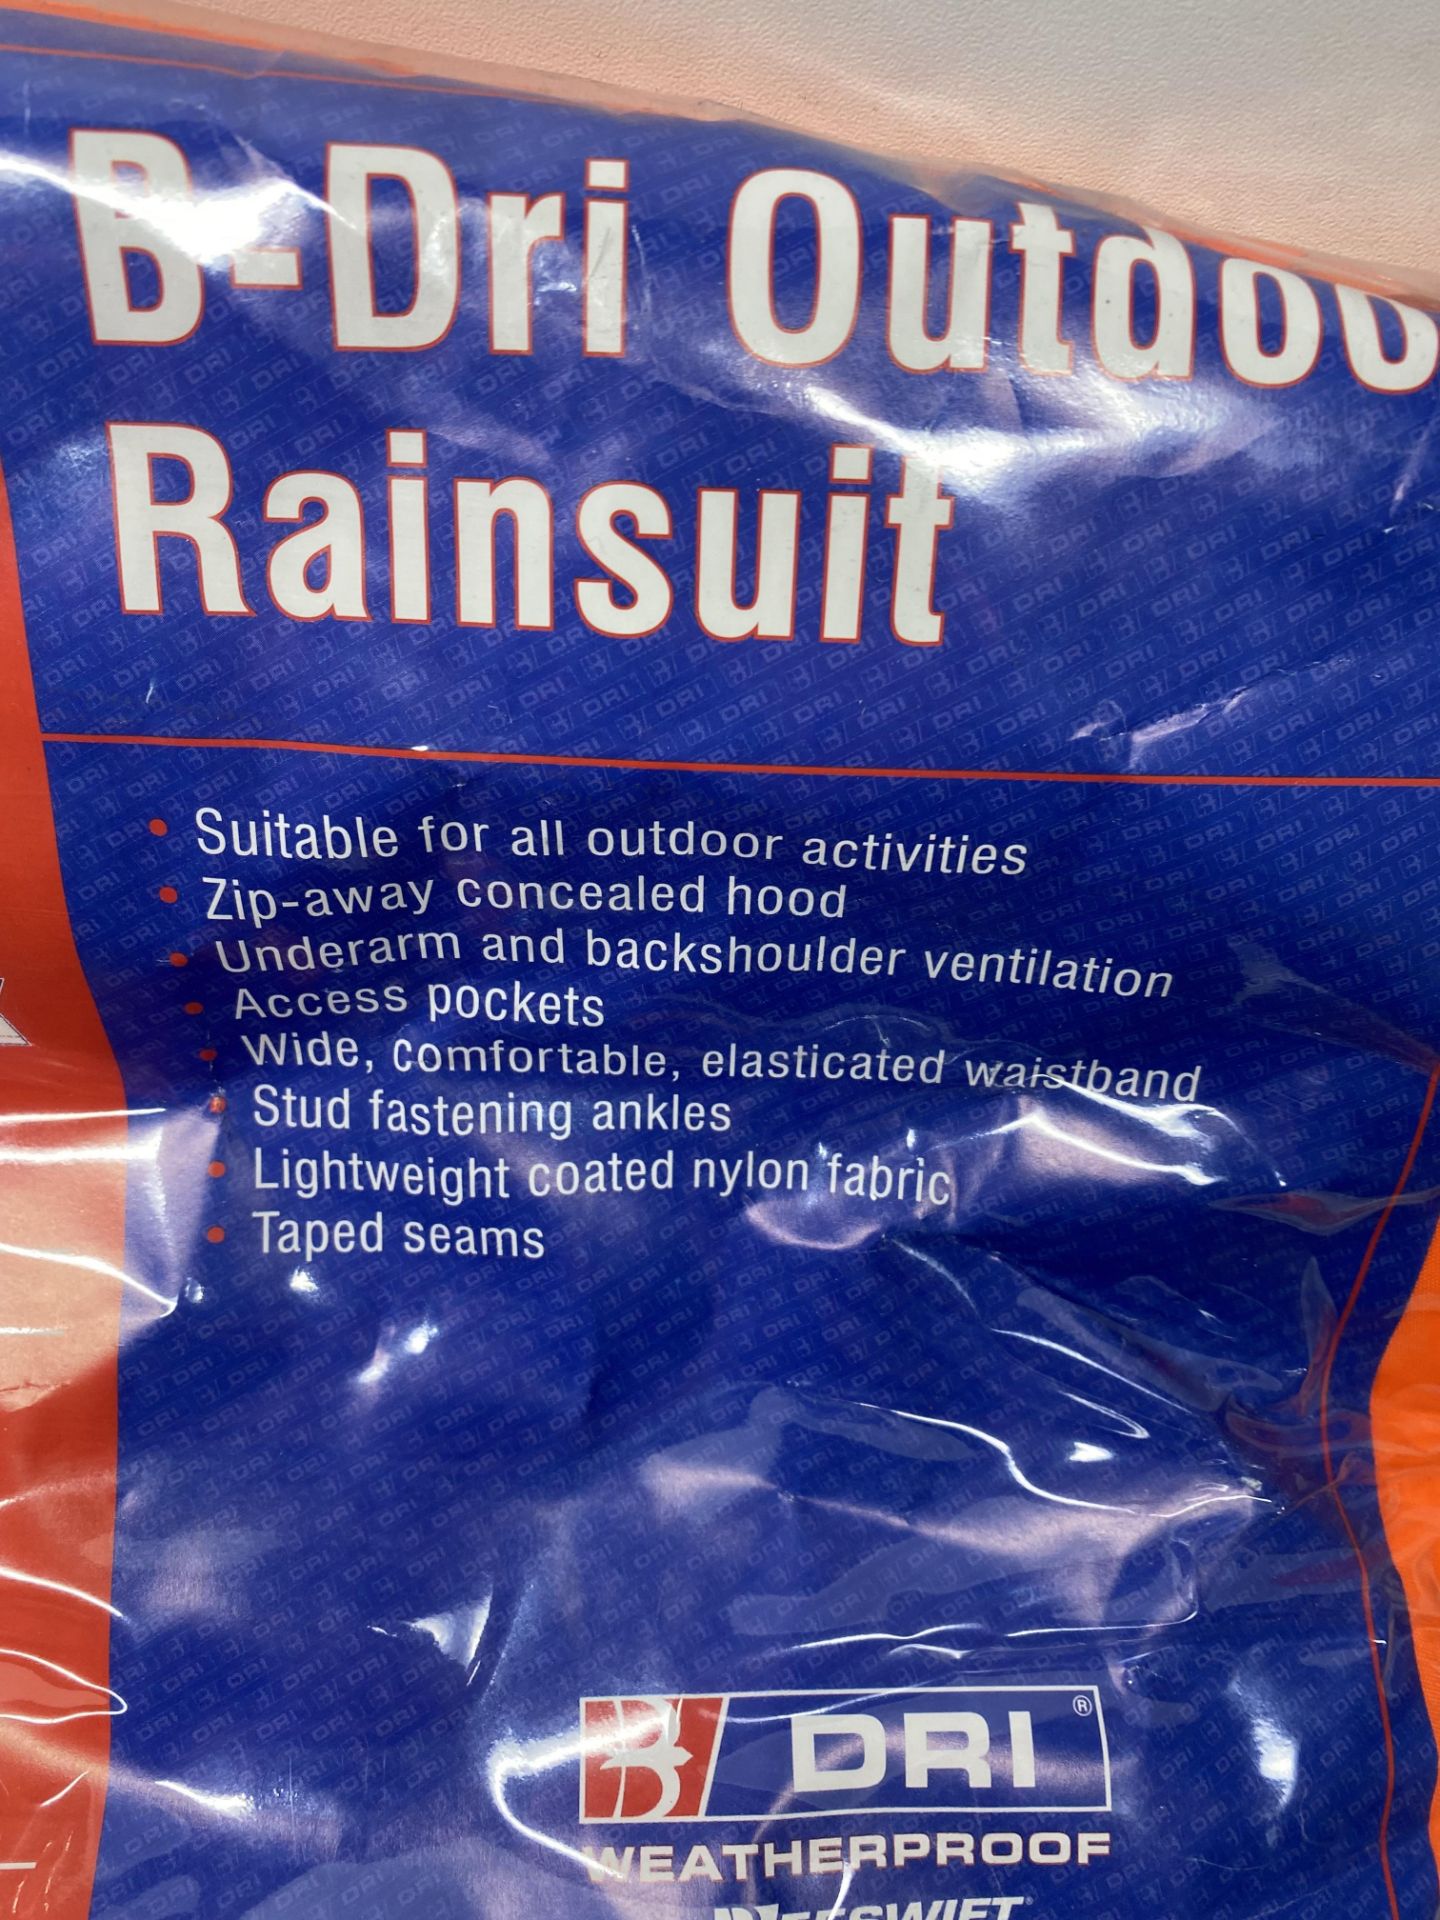 13 x Large/Extra Large B - Dri Outdoor Rainsuits - See Description - Image 4 of 6